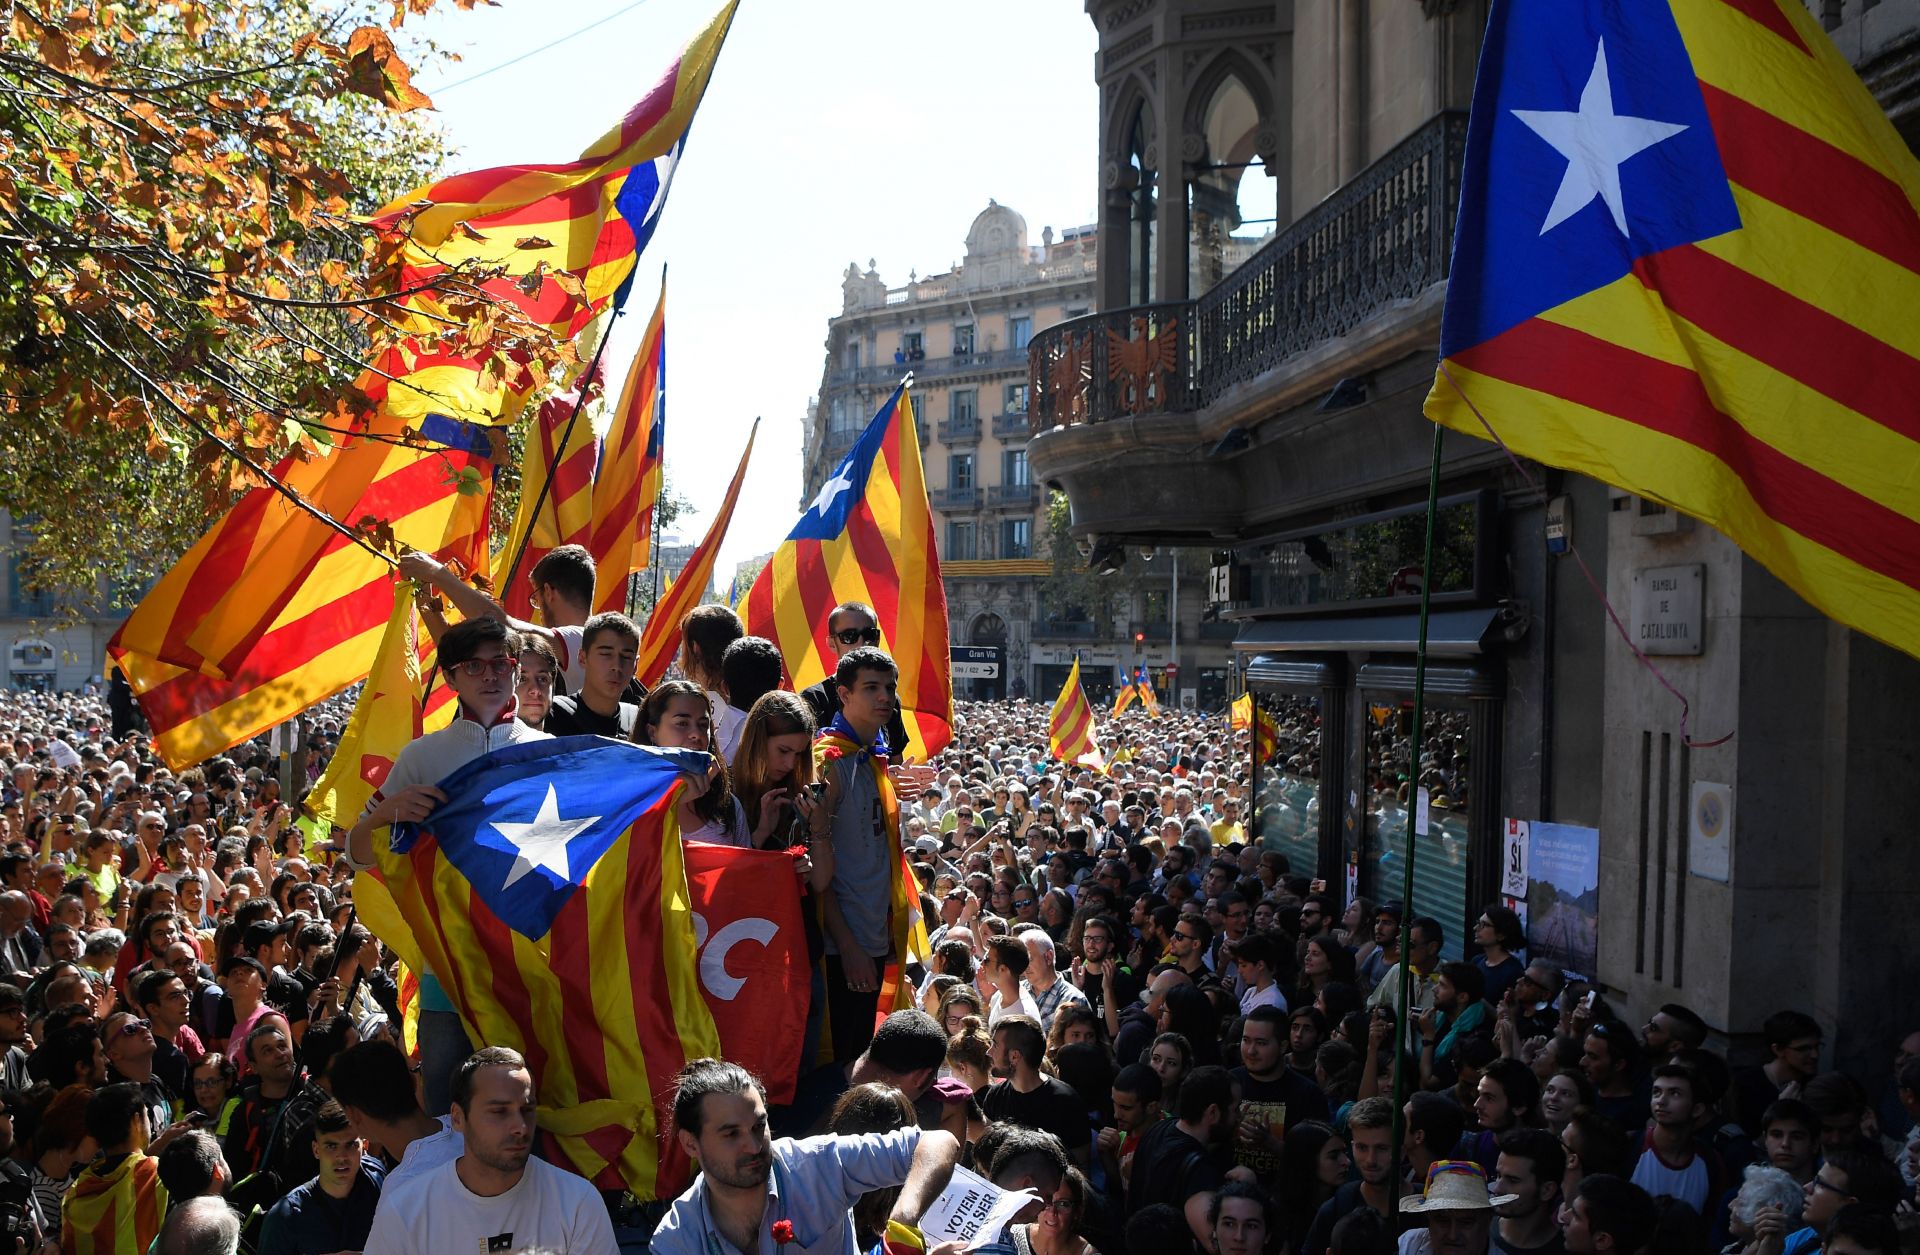 Catalonia's pro-independence flag is on full display during a Sept. 20 protest in Barcelona, Spain.